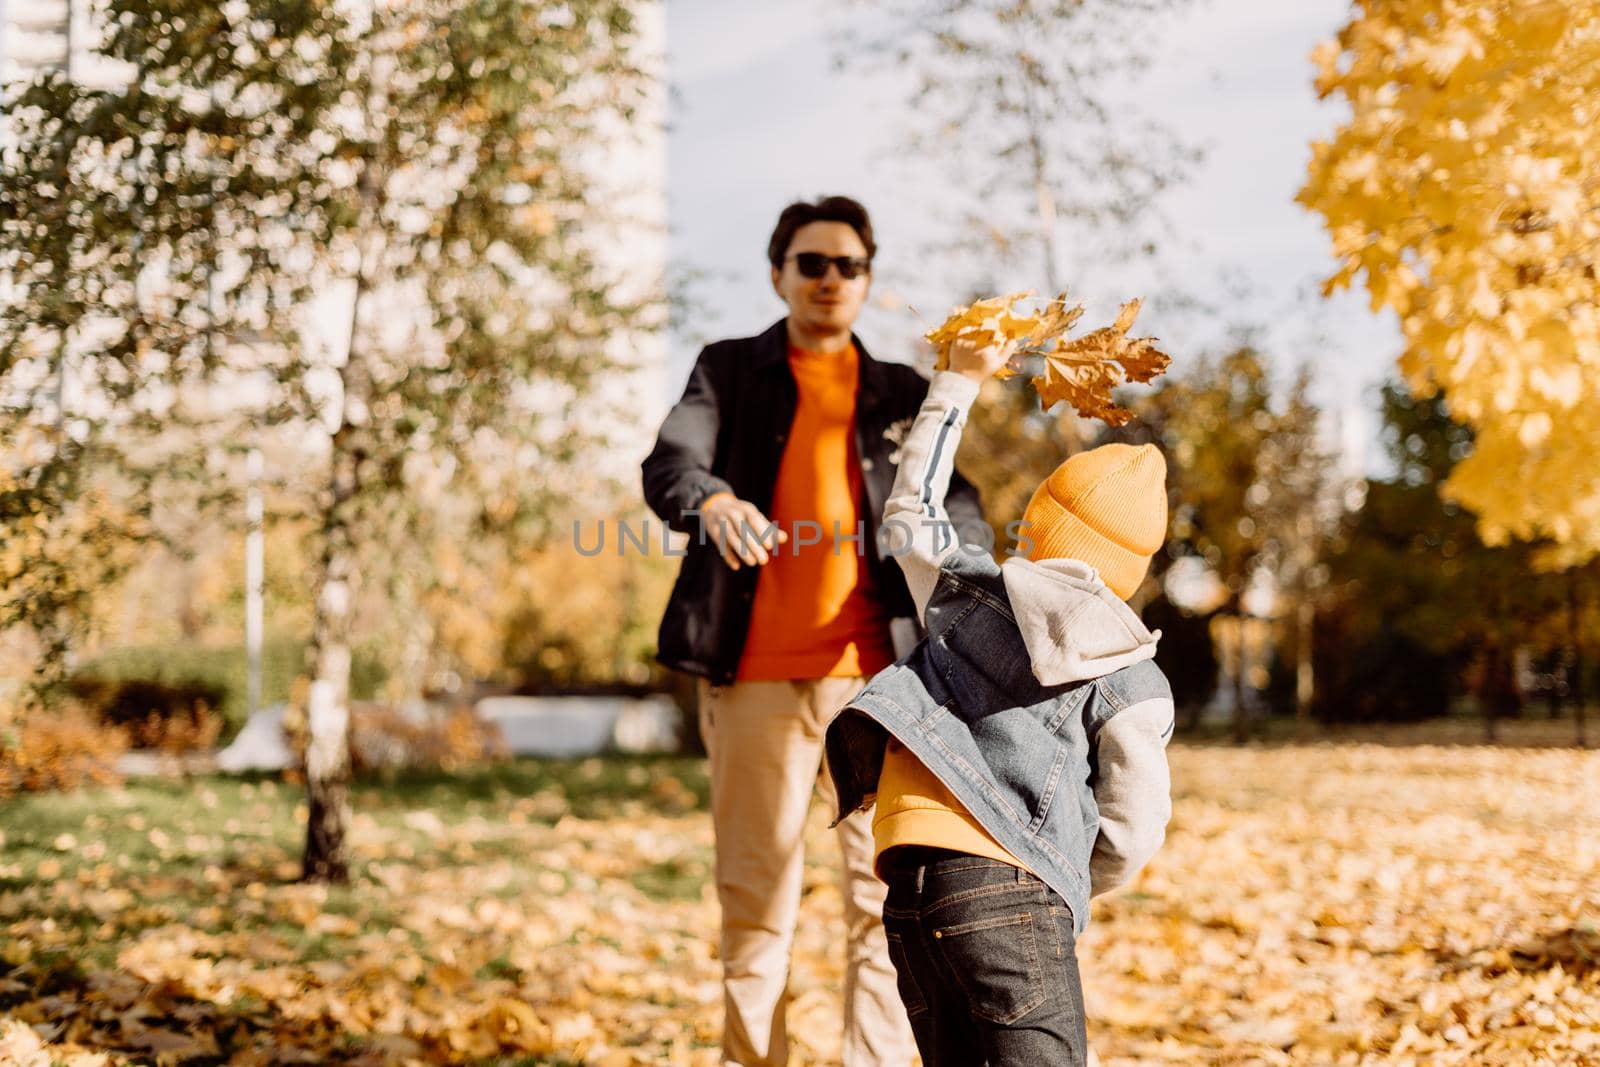 Father and son having fun in autumn park with fallen leaves, throwing up leaf. Child kid boy and his dad outdoors playing with maple leaves. by Ostanina